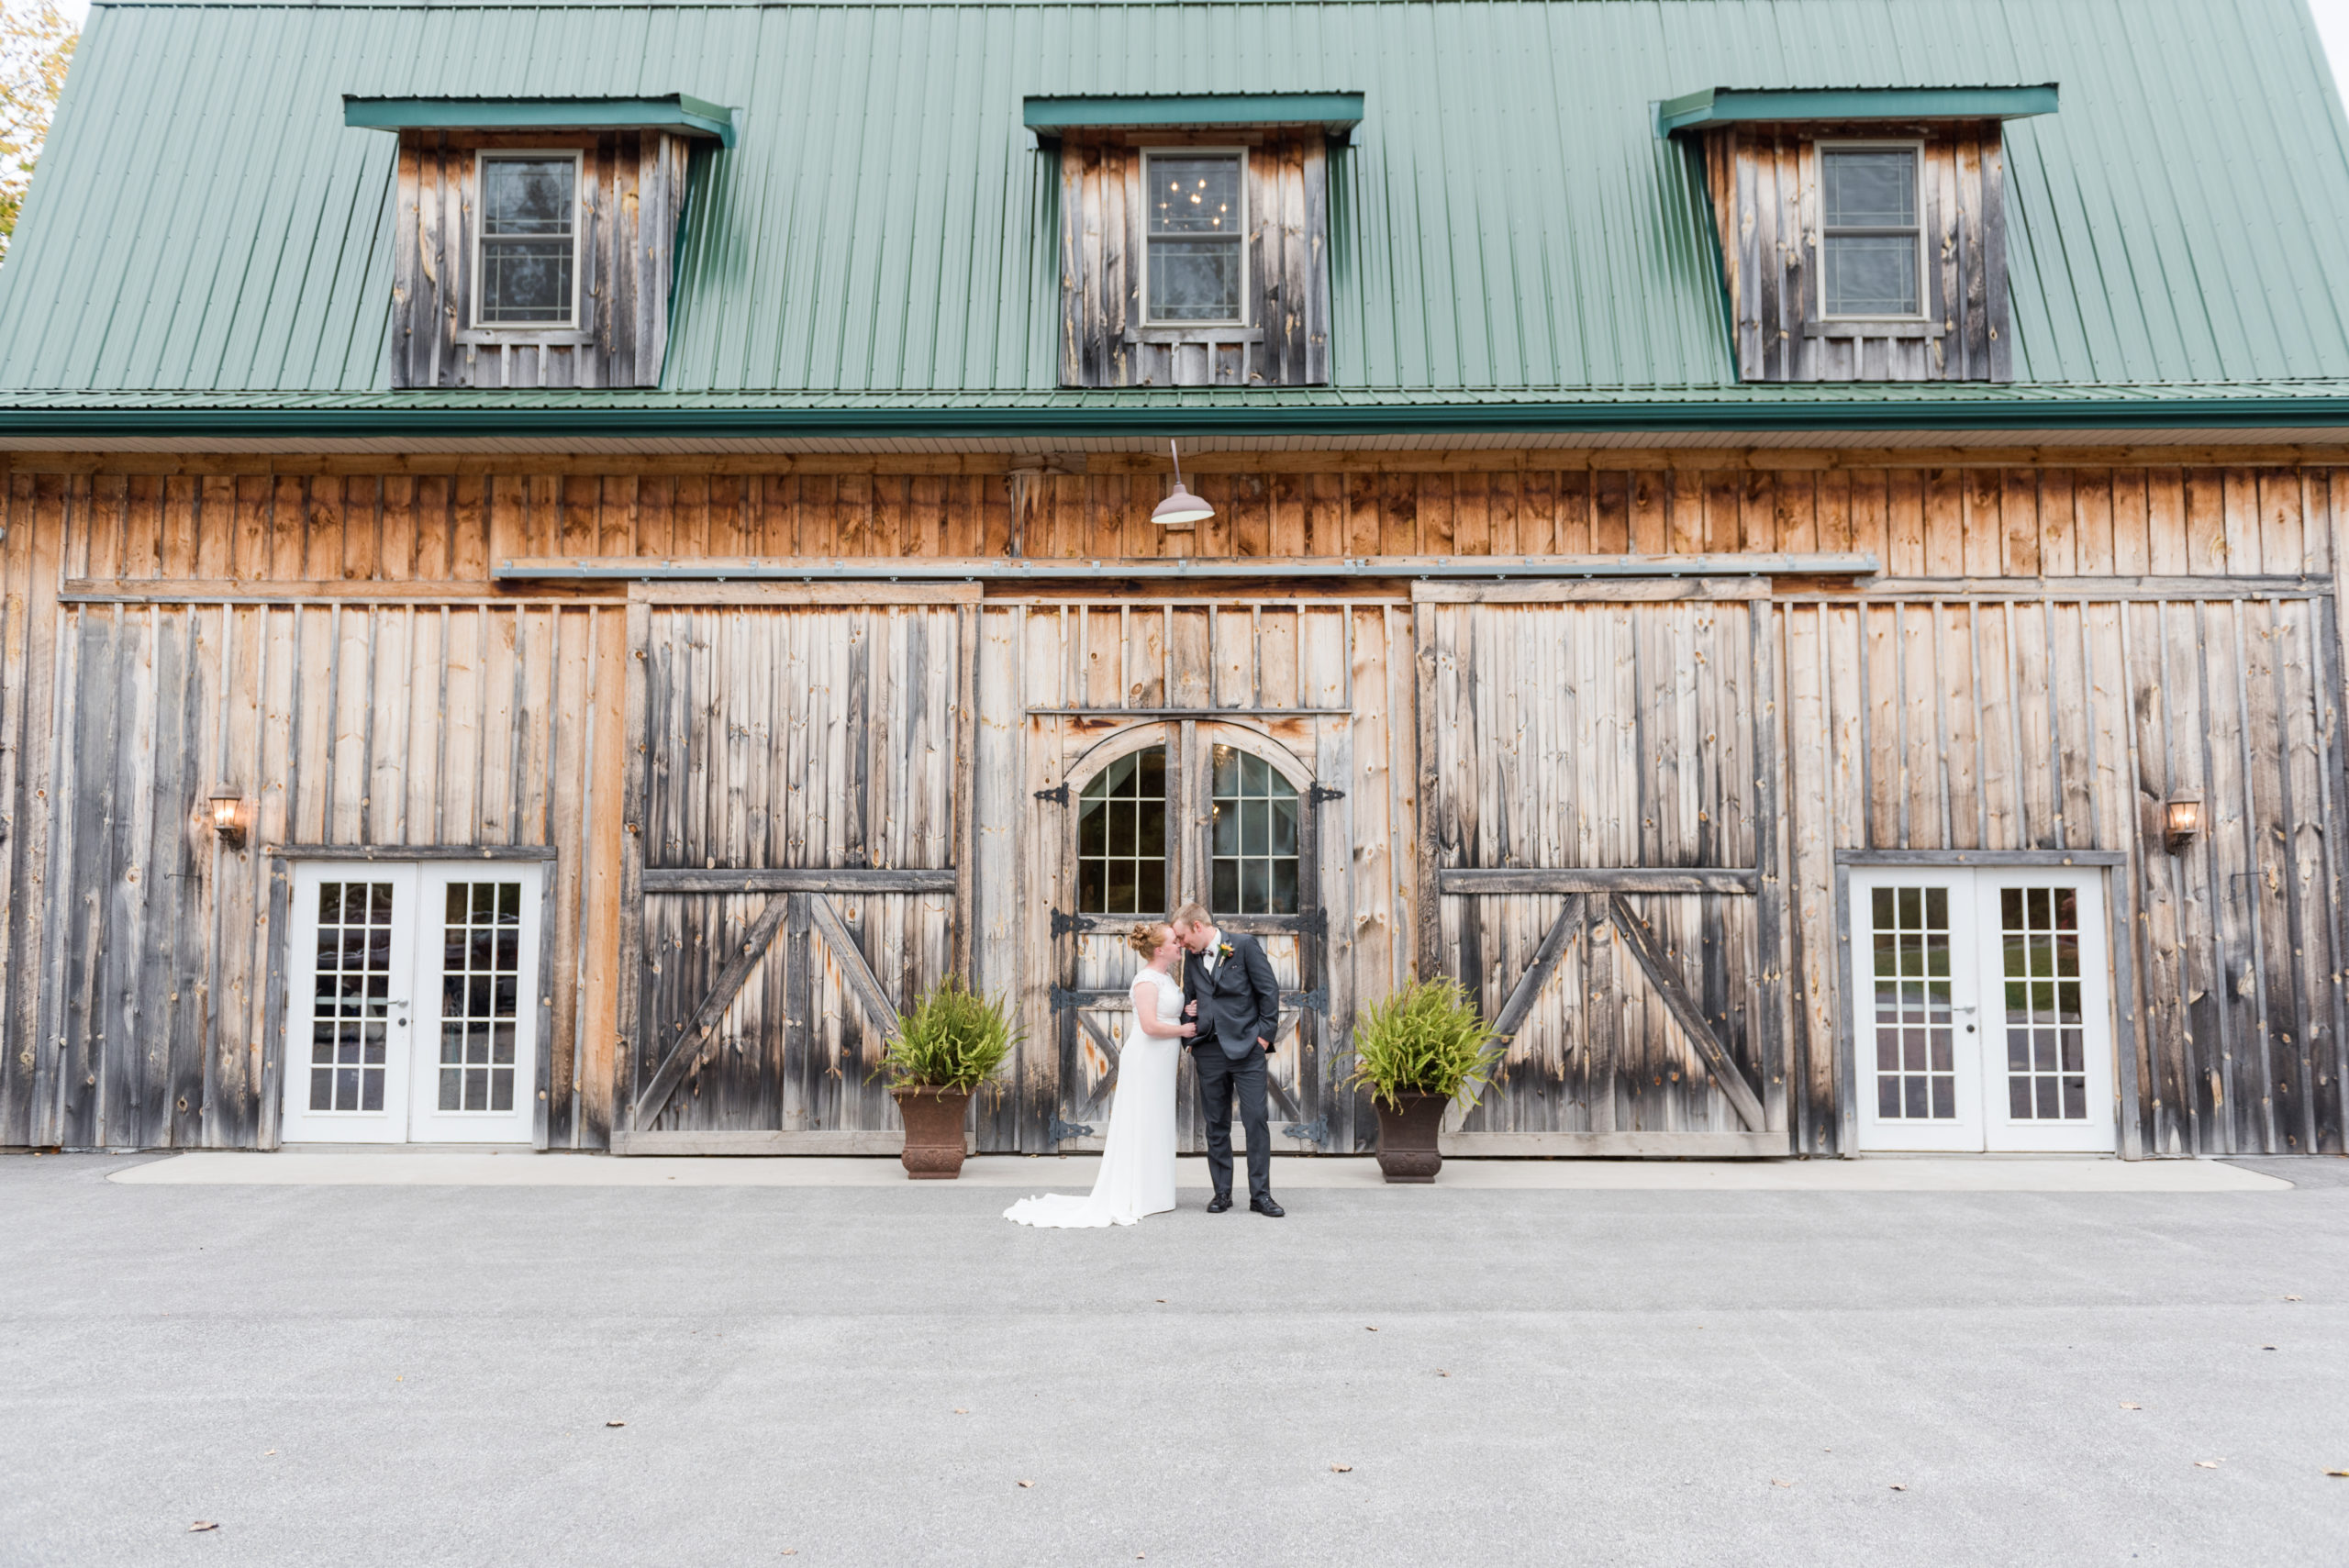 Fall Burgundy Wedding at Wolf Oak Acres Upstate New York - Sweet Williams Photography is a wedding and engagement photographer.